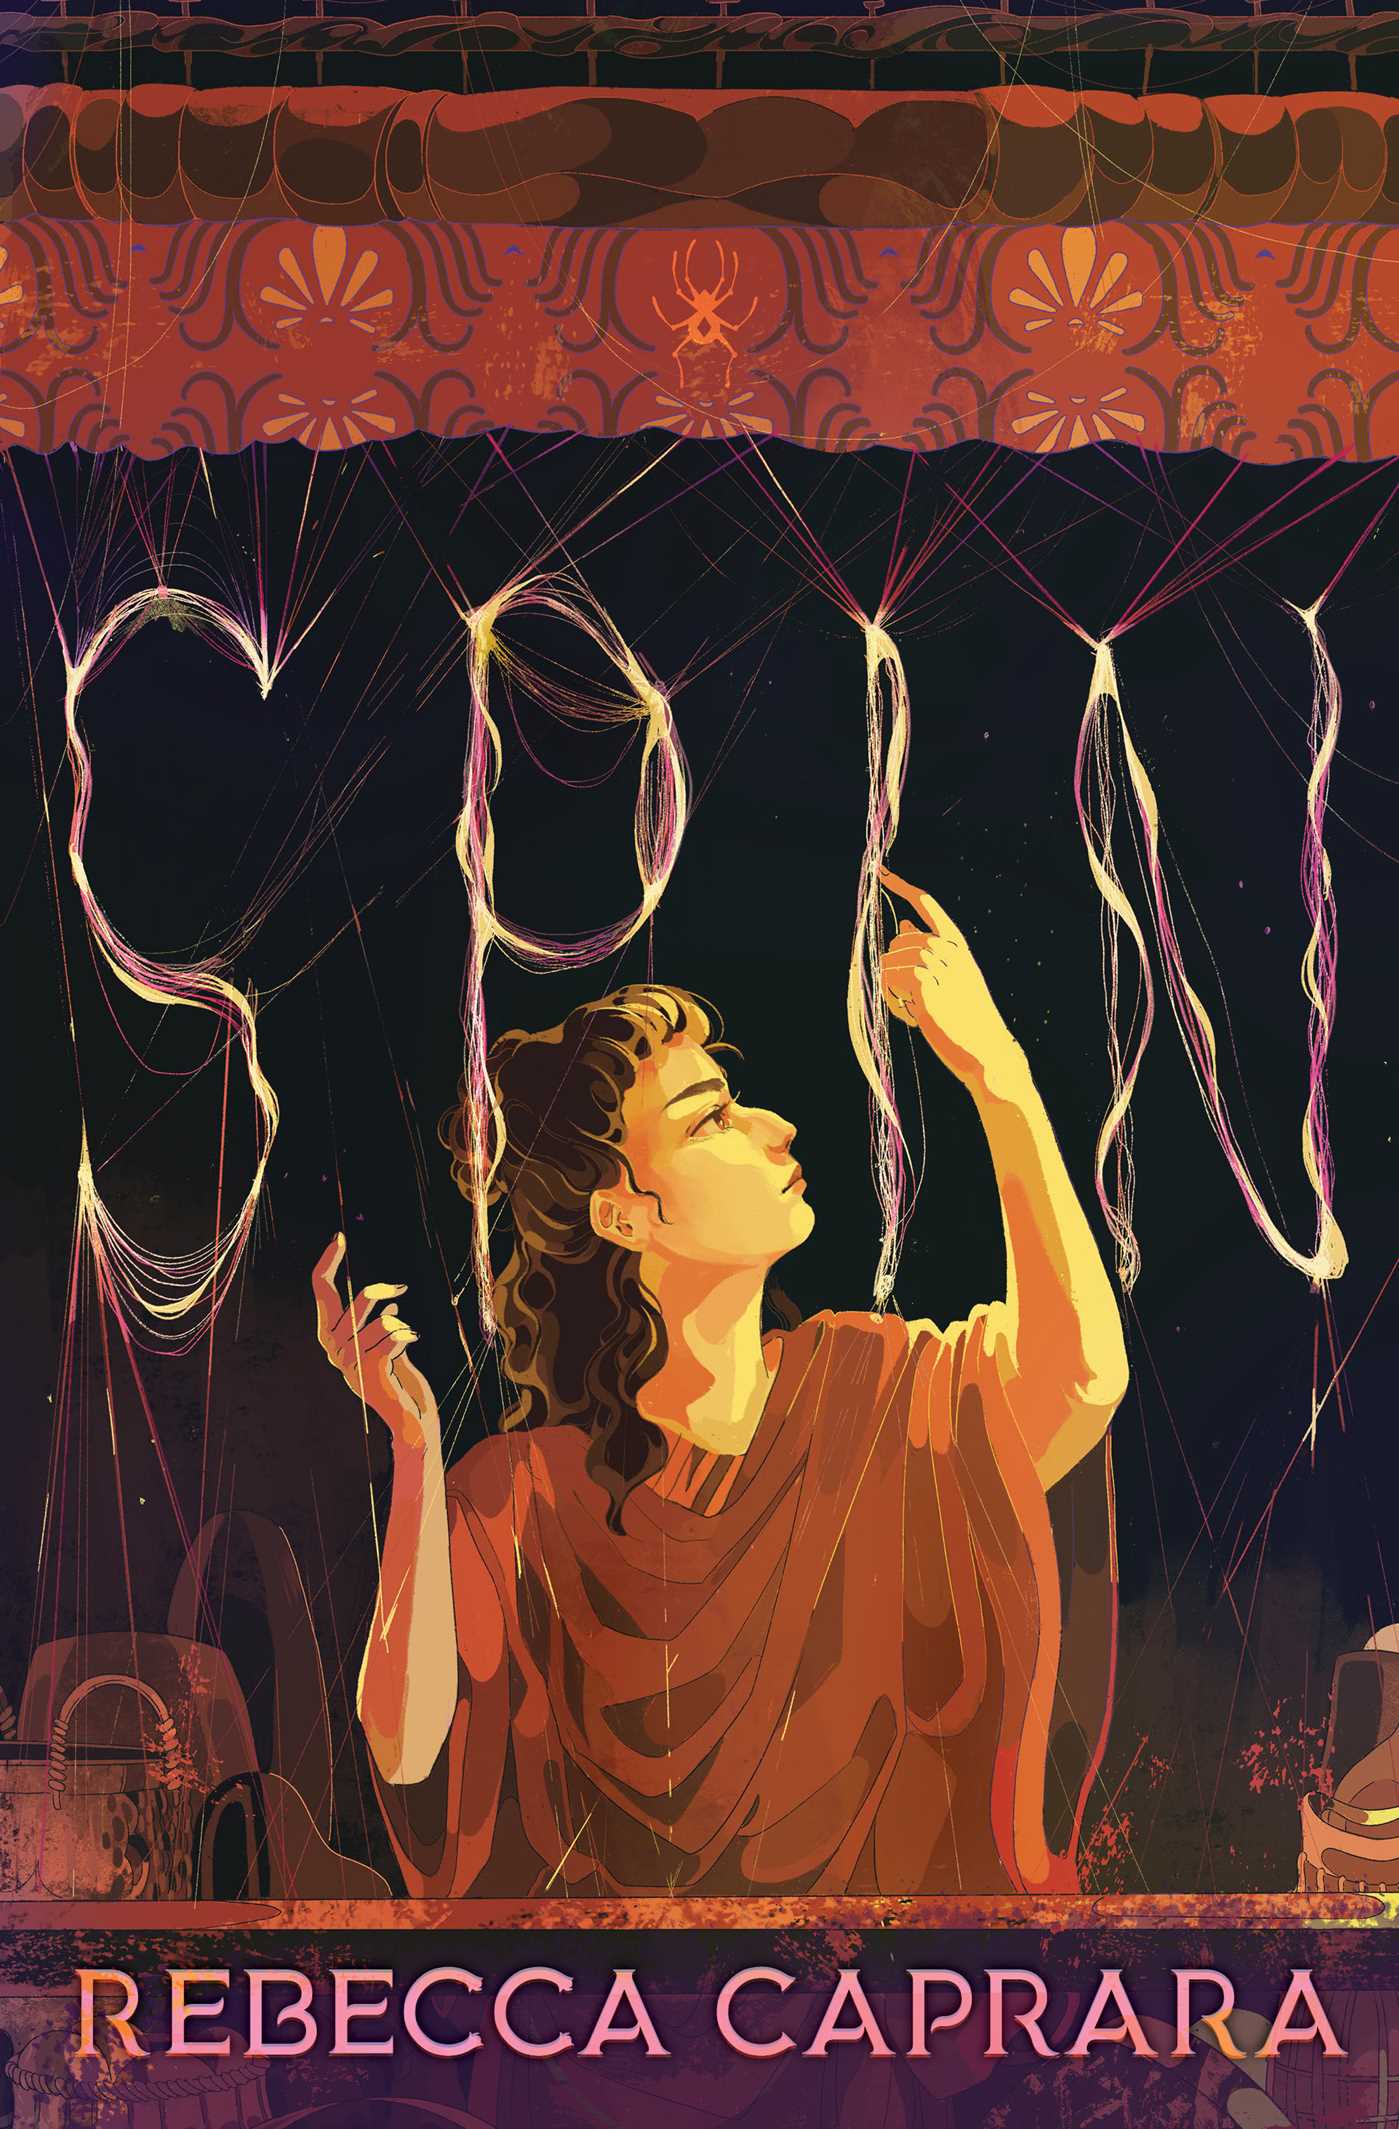 Cover for "Spin"